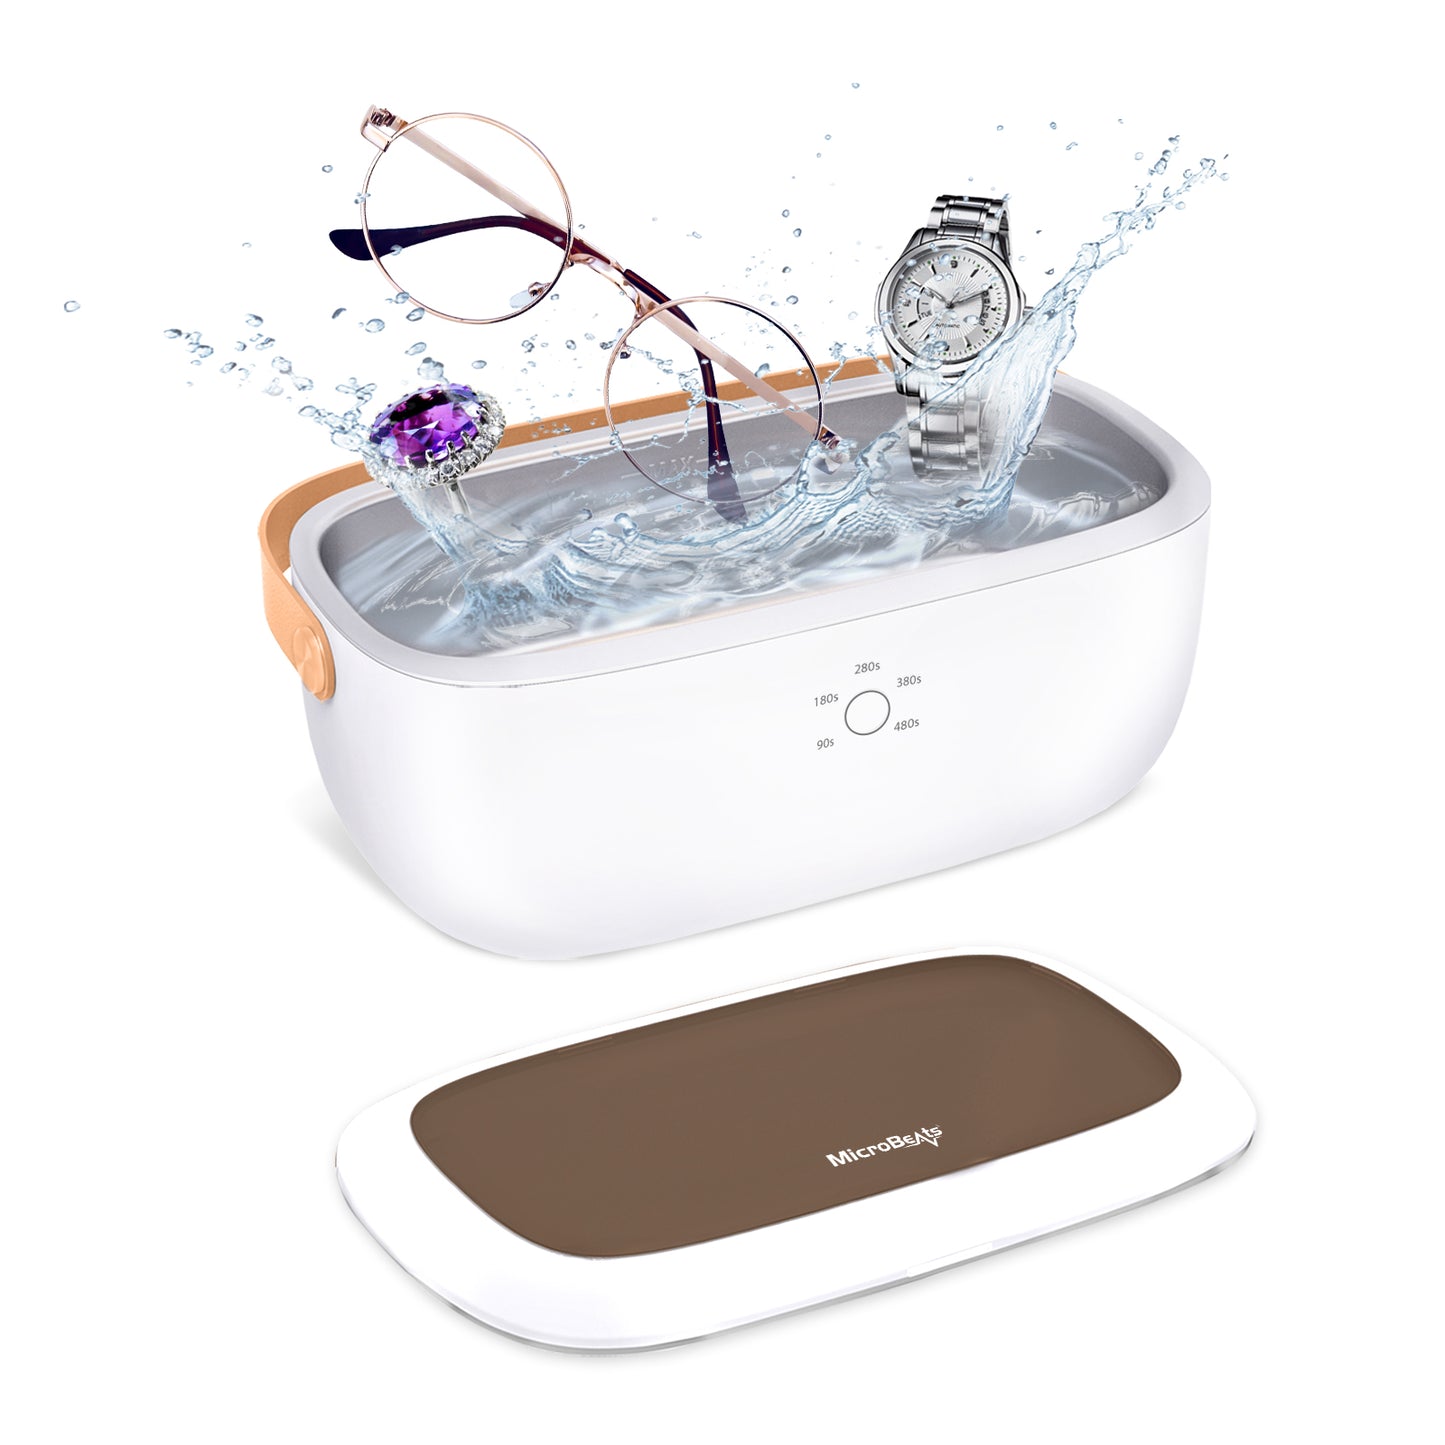 MicroBeats Ultrasonic Jewelry Cleaner: Portable Cleaning Machine for Watches, Eyeglasses, Coins, Rings